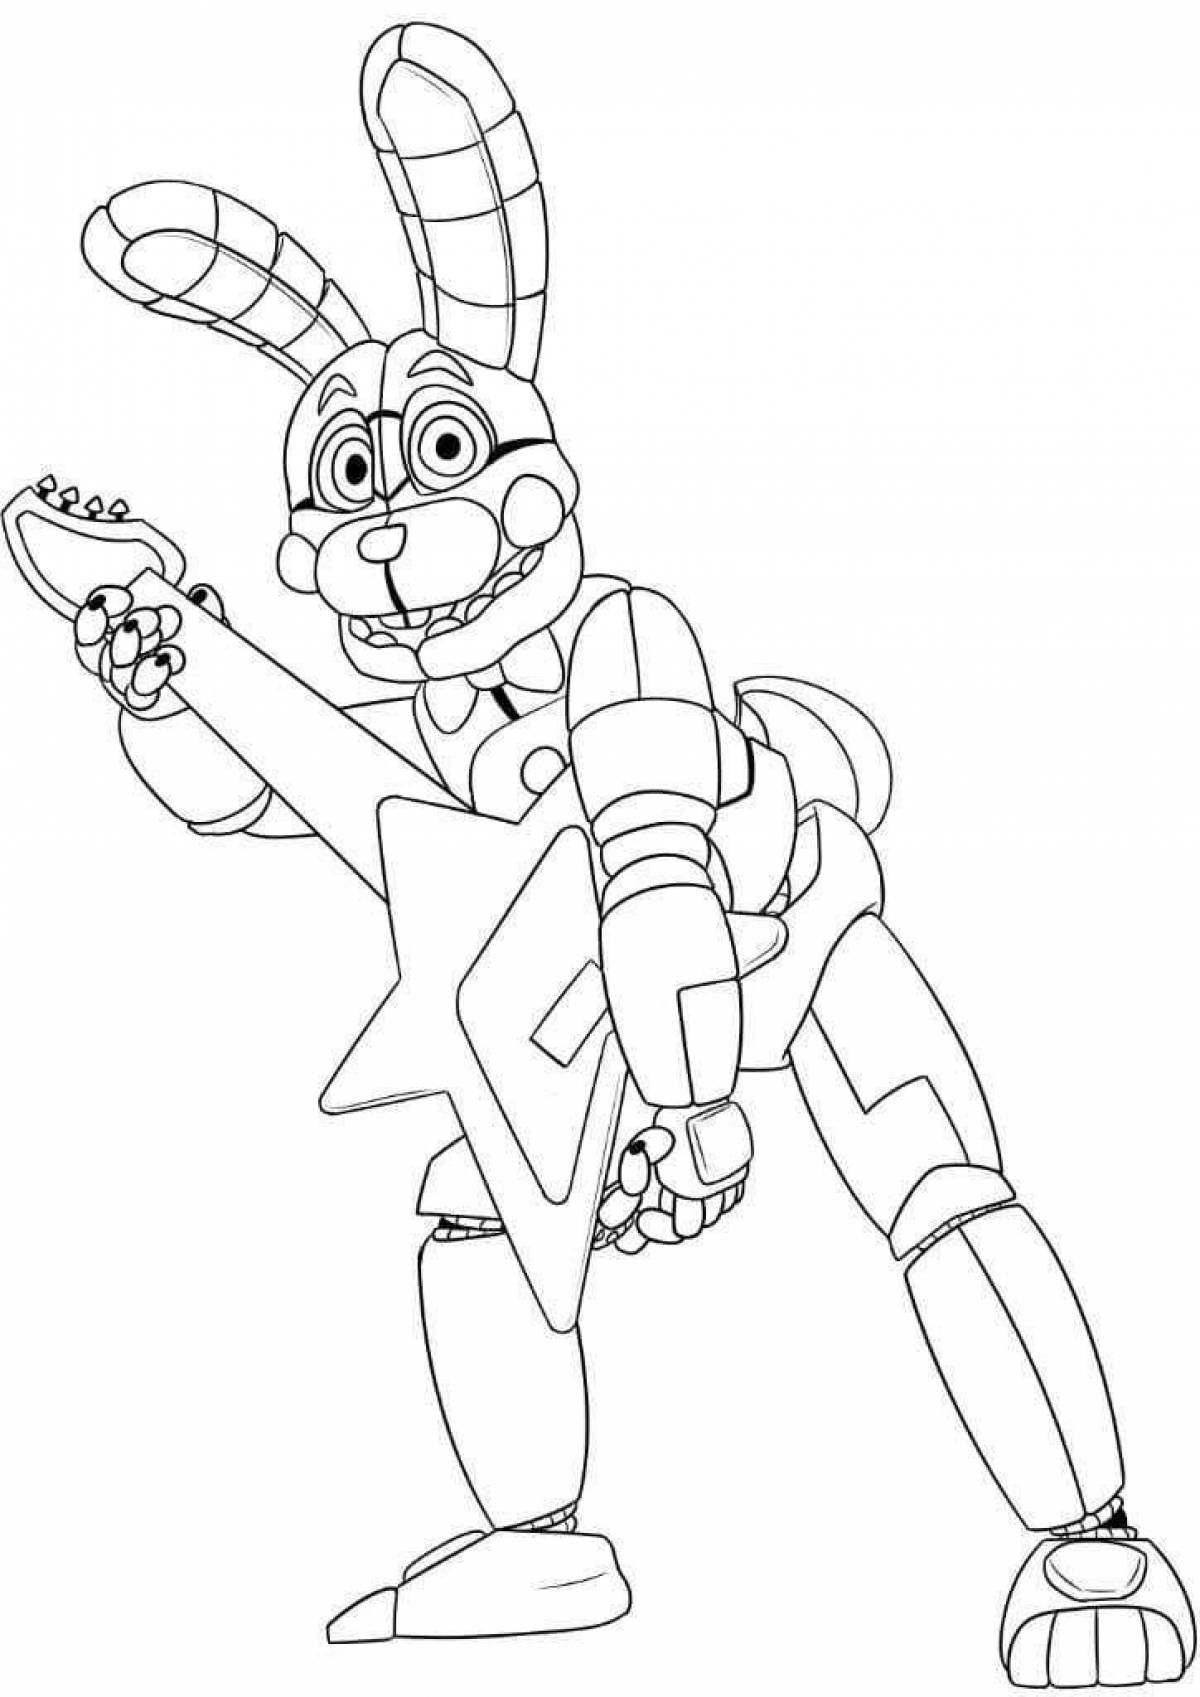 Glowing bonnie coloring page